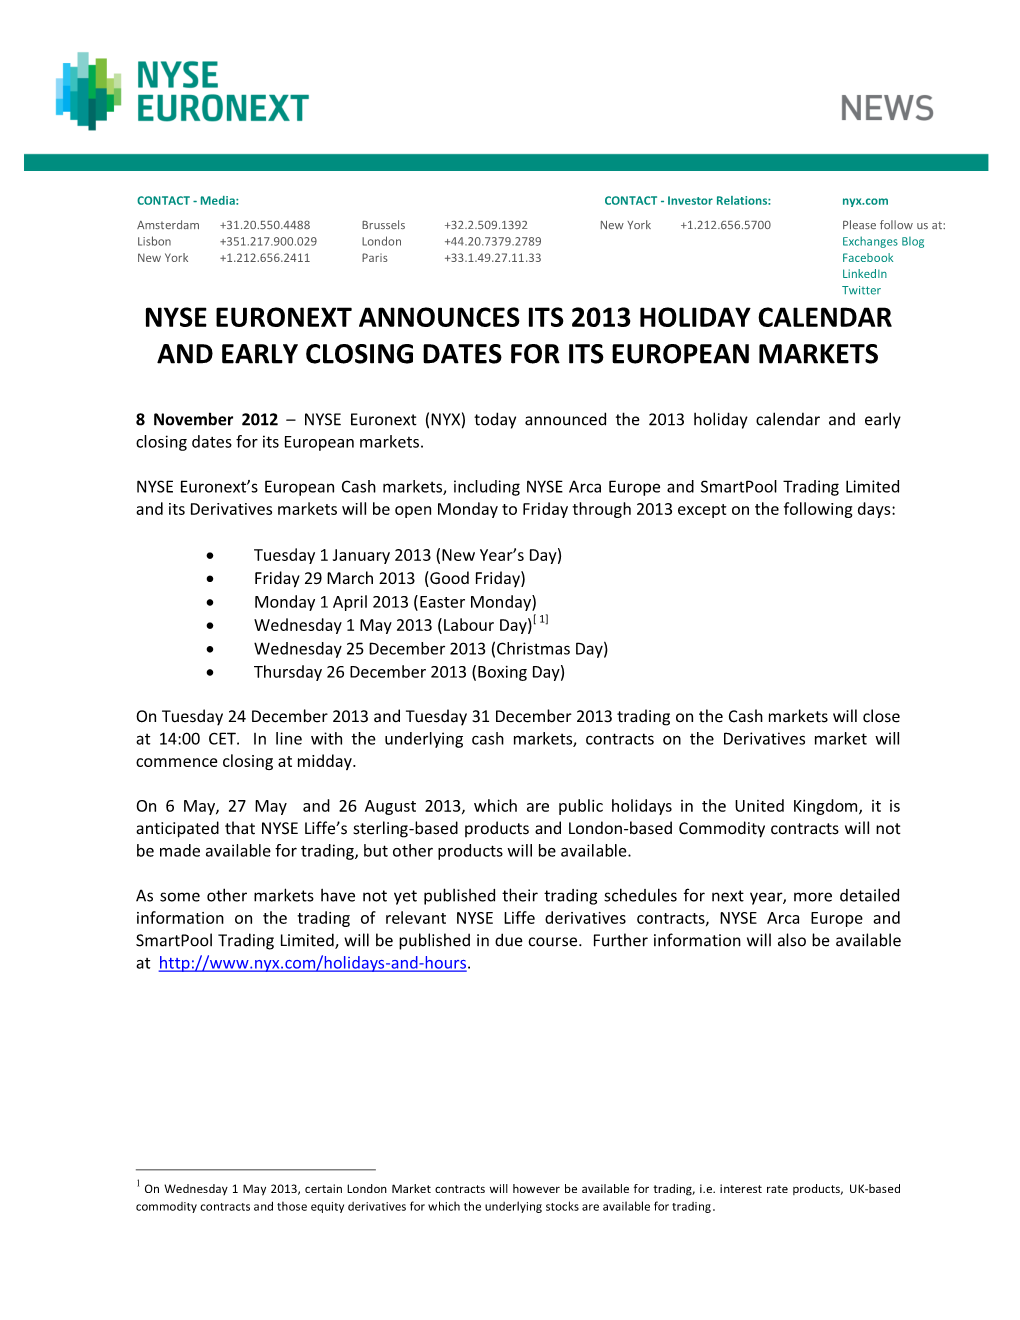 Nyse Euronext Announces Its 2013 Holiday Calendar and Early Closing Dates for Its European Markets